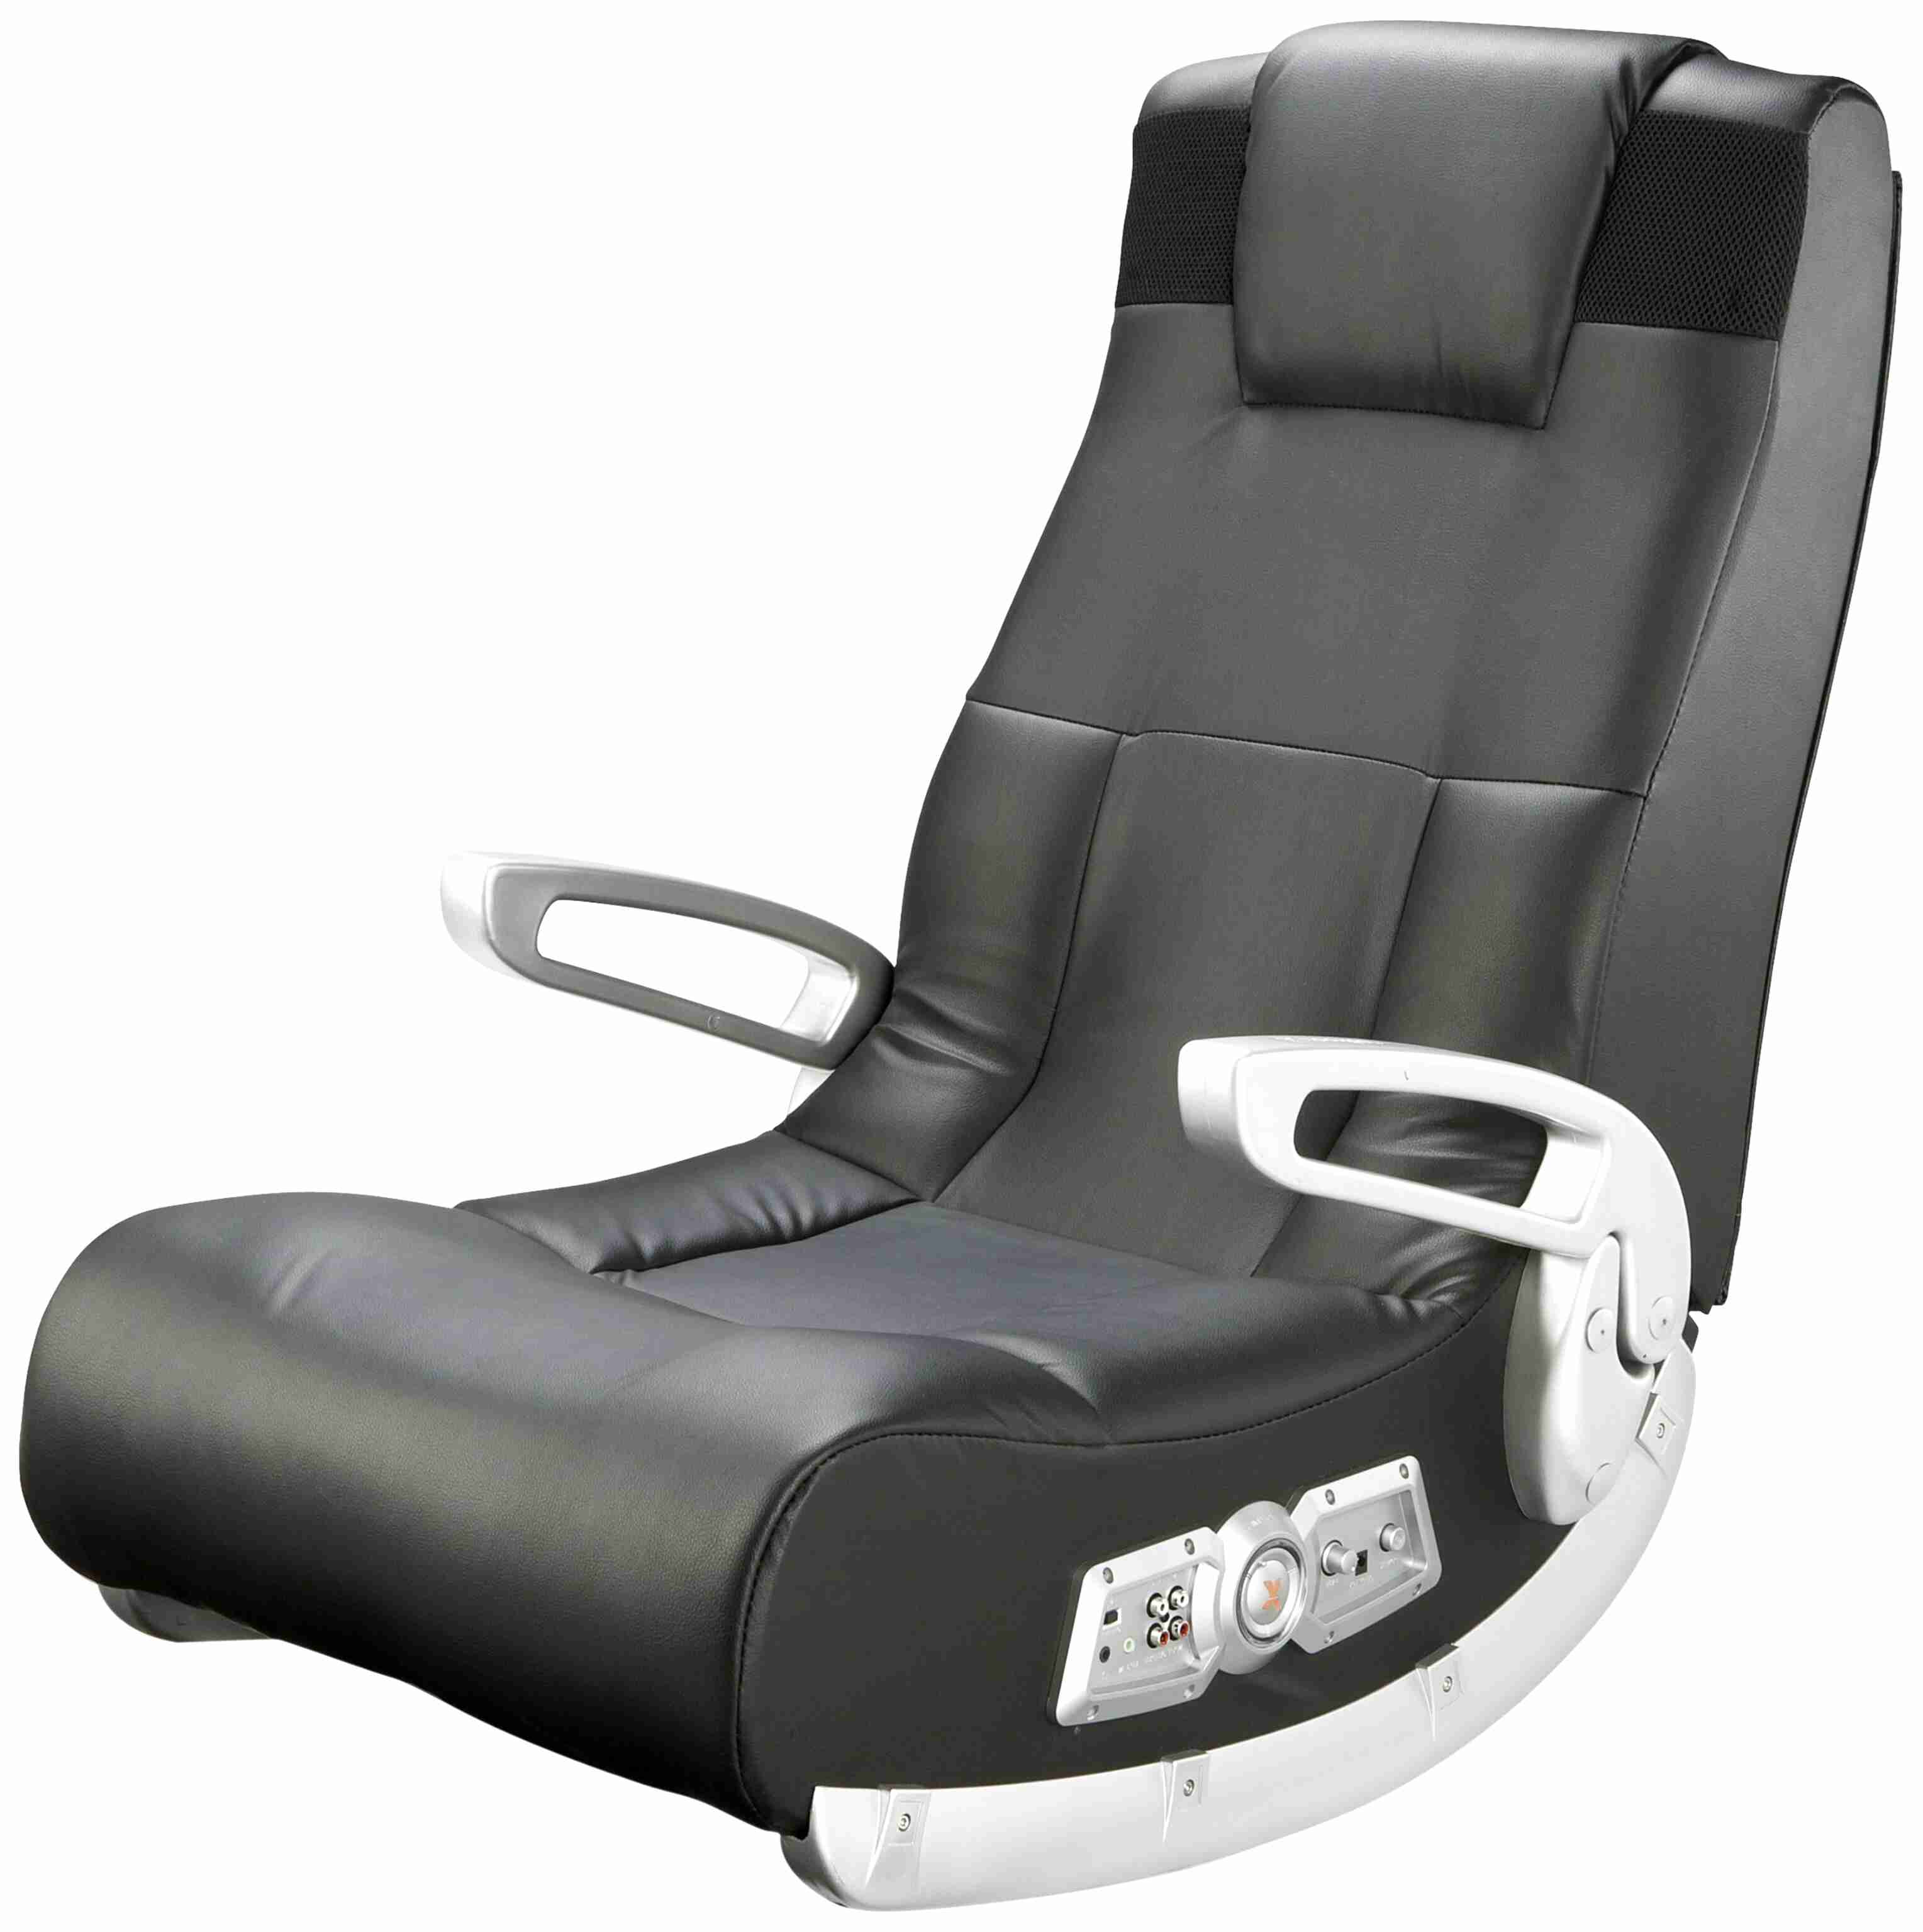 X Rocker Gaming Chair for sale in UK | 88 used X Rocker Gaming Chairs